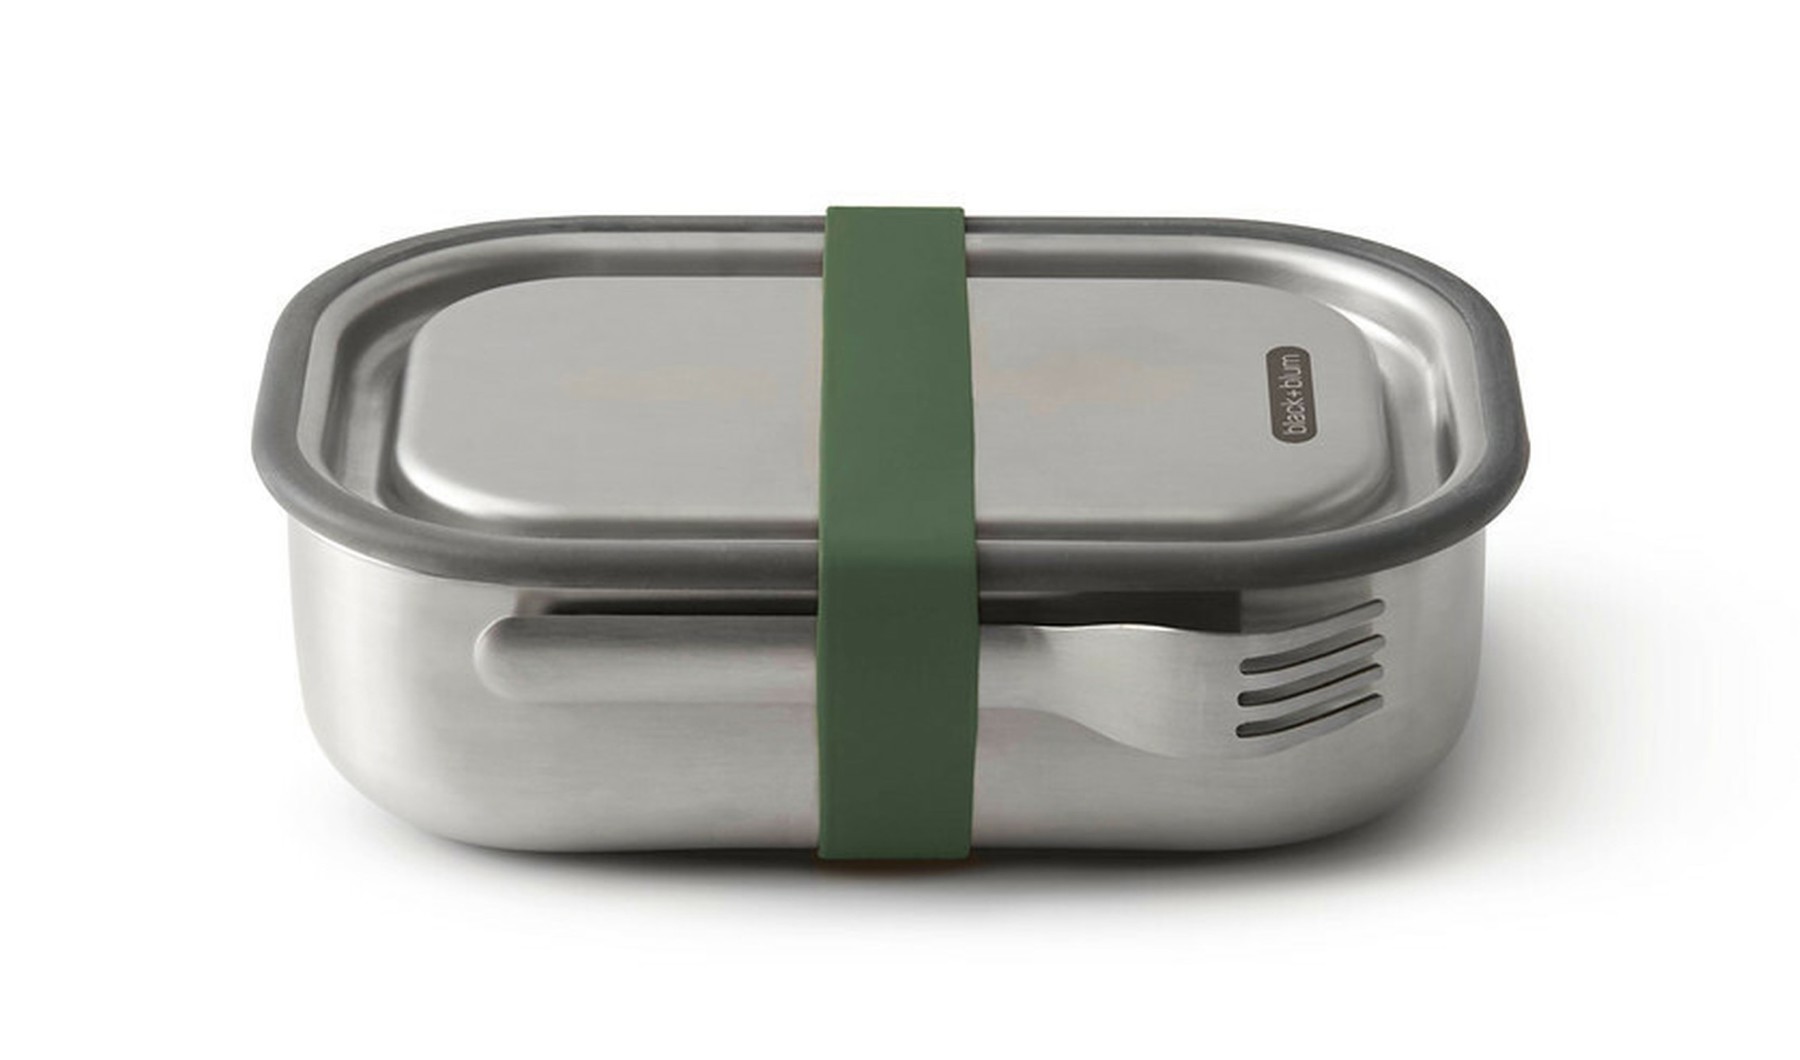 A metal lunch box with attached fork and green strap.